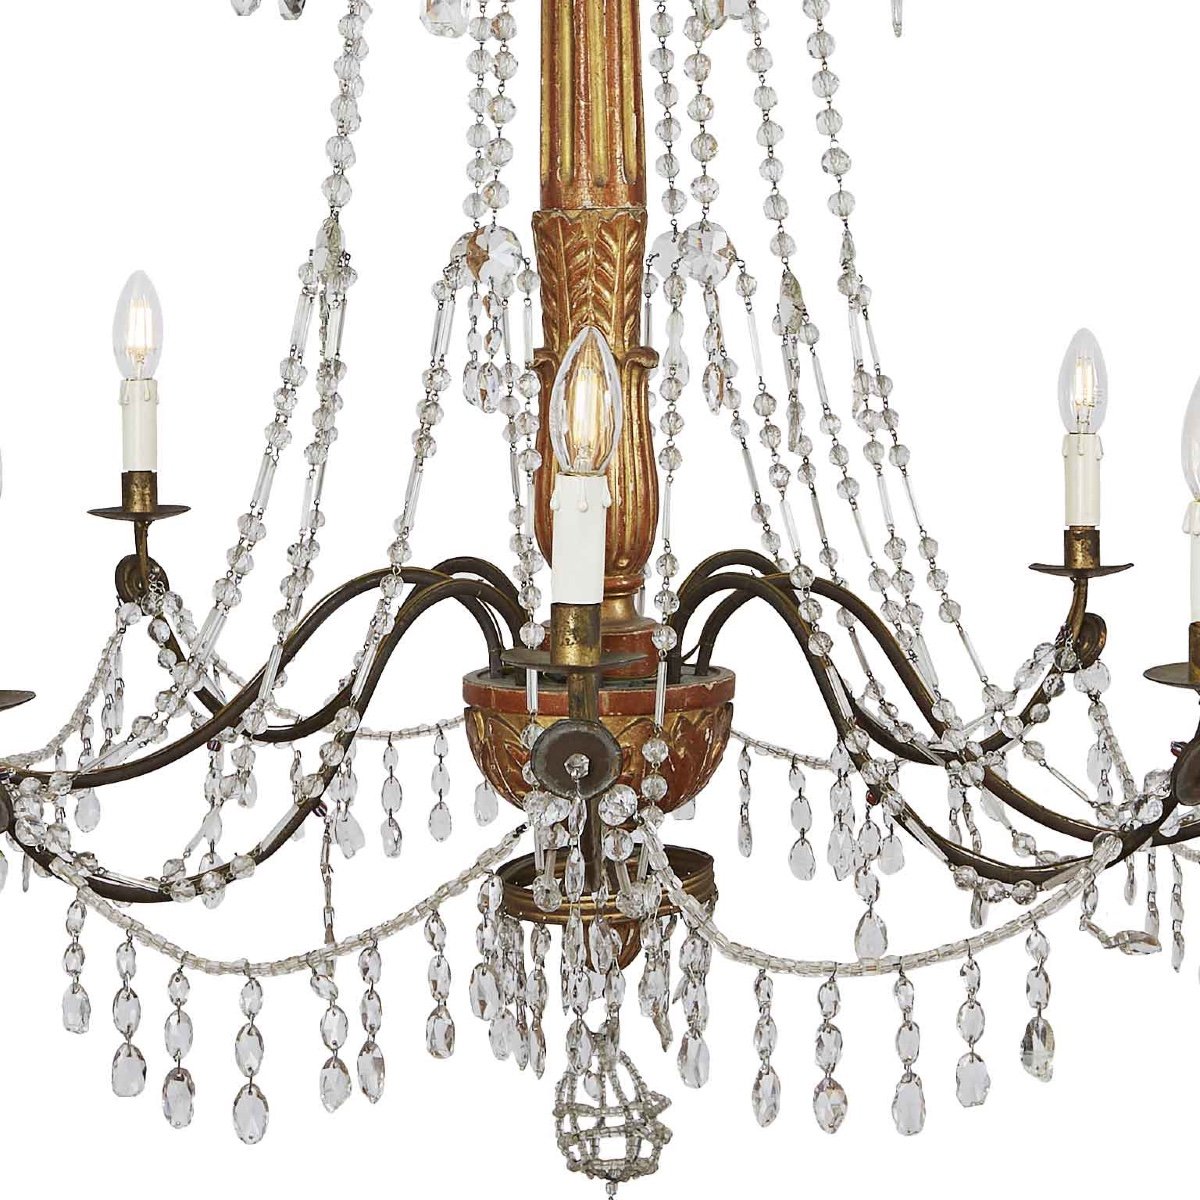 Louis XVI Genoese Chandelier In Gilded Wood And Crystals End 1700 Eight Lights -photo-1